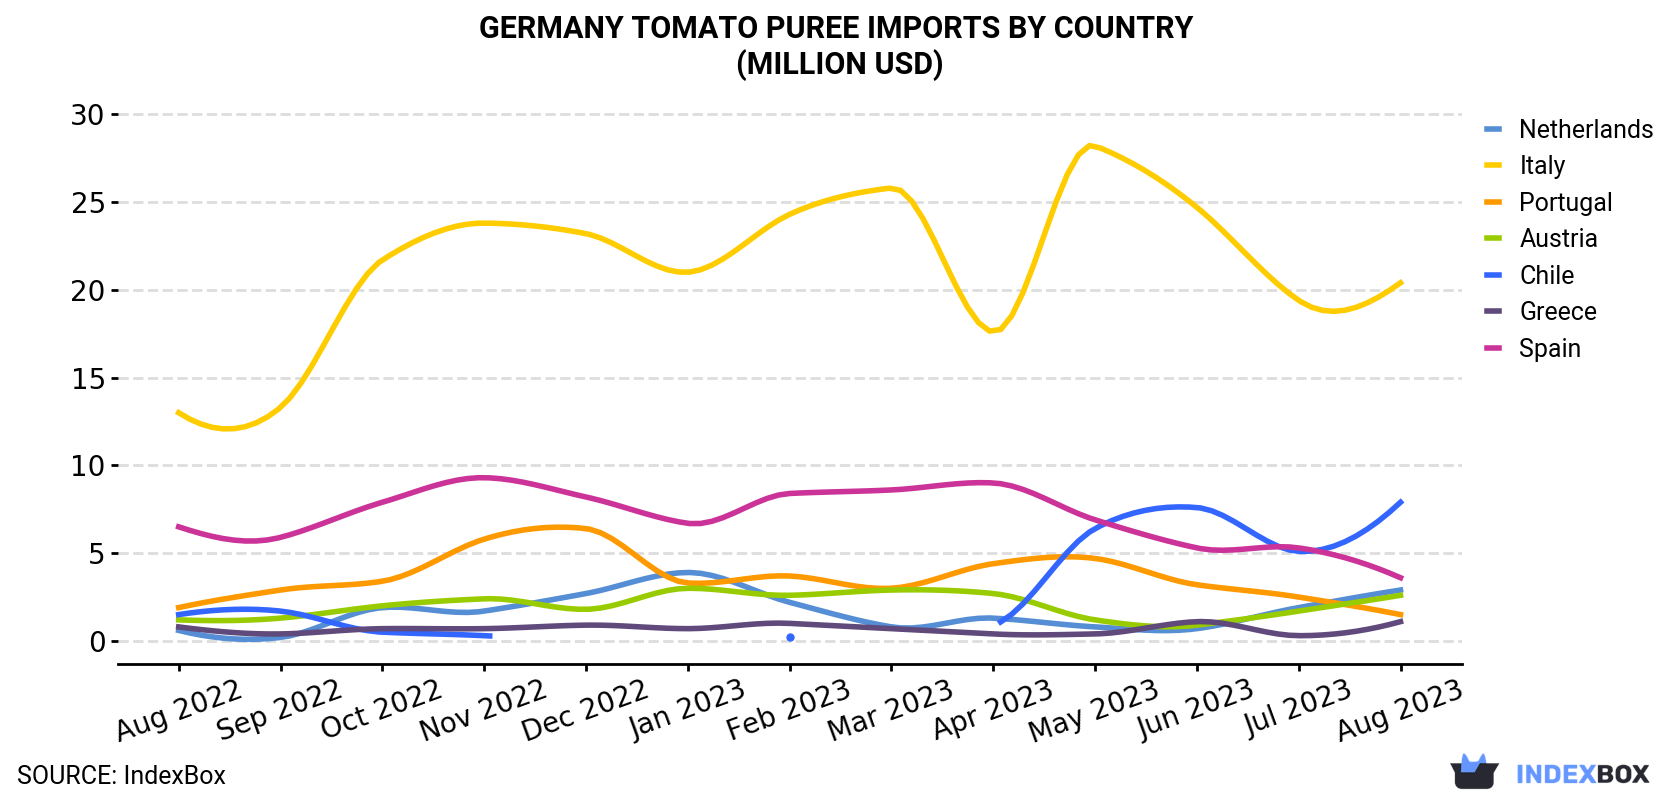 Germany Tomato Puree Imports By Country (Million USD)